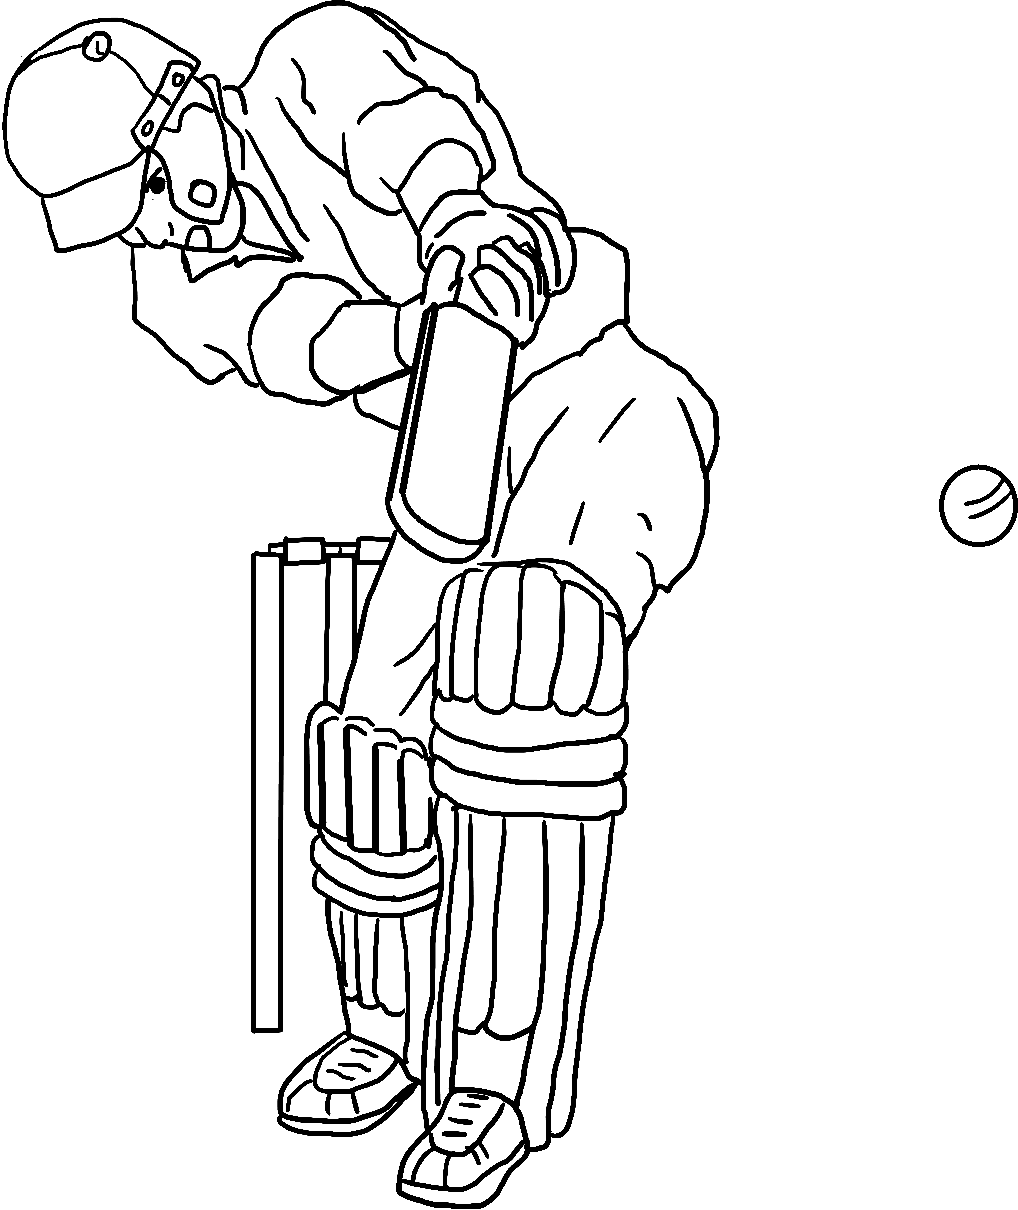 5,322 Cricket Game Art Royalty-Free Photos and Stock Images | Shutterstock